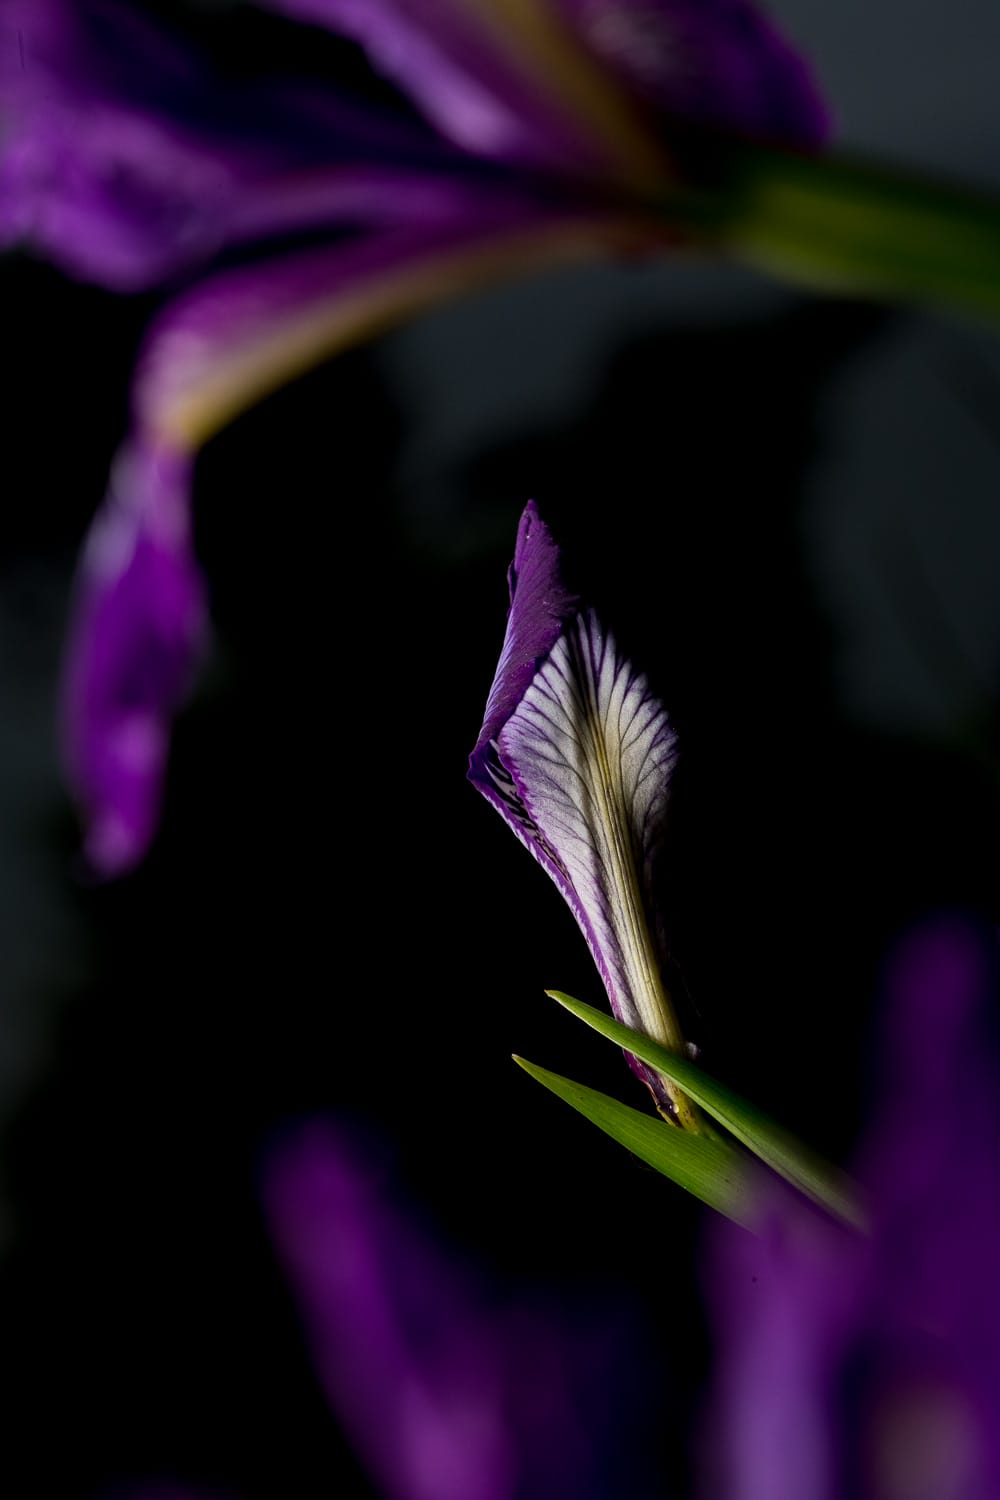 Close-up of a purple iris flower in partial shadow.